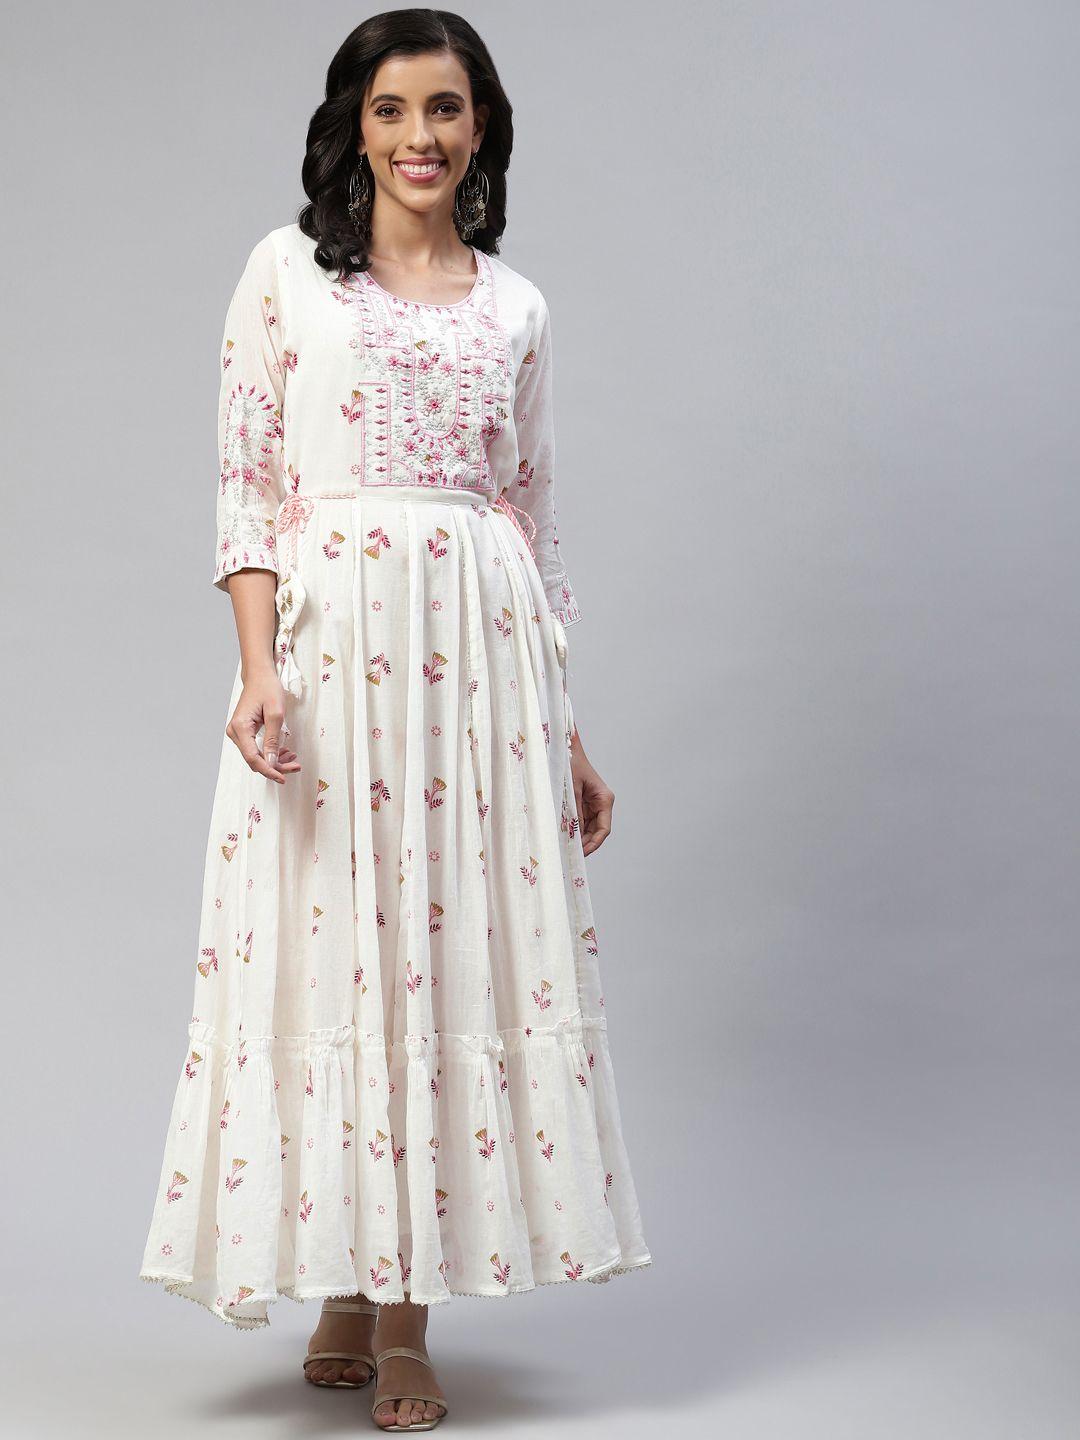 readiprint fashions white cotton floral embroidered tiered maxi ethnic dress with tie ups